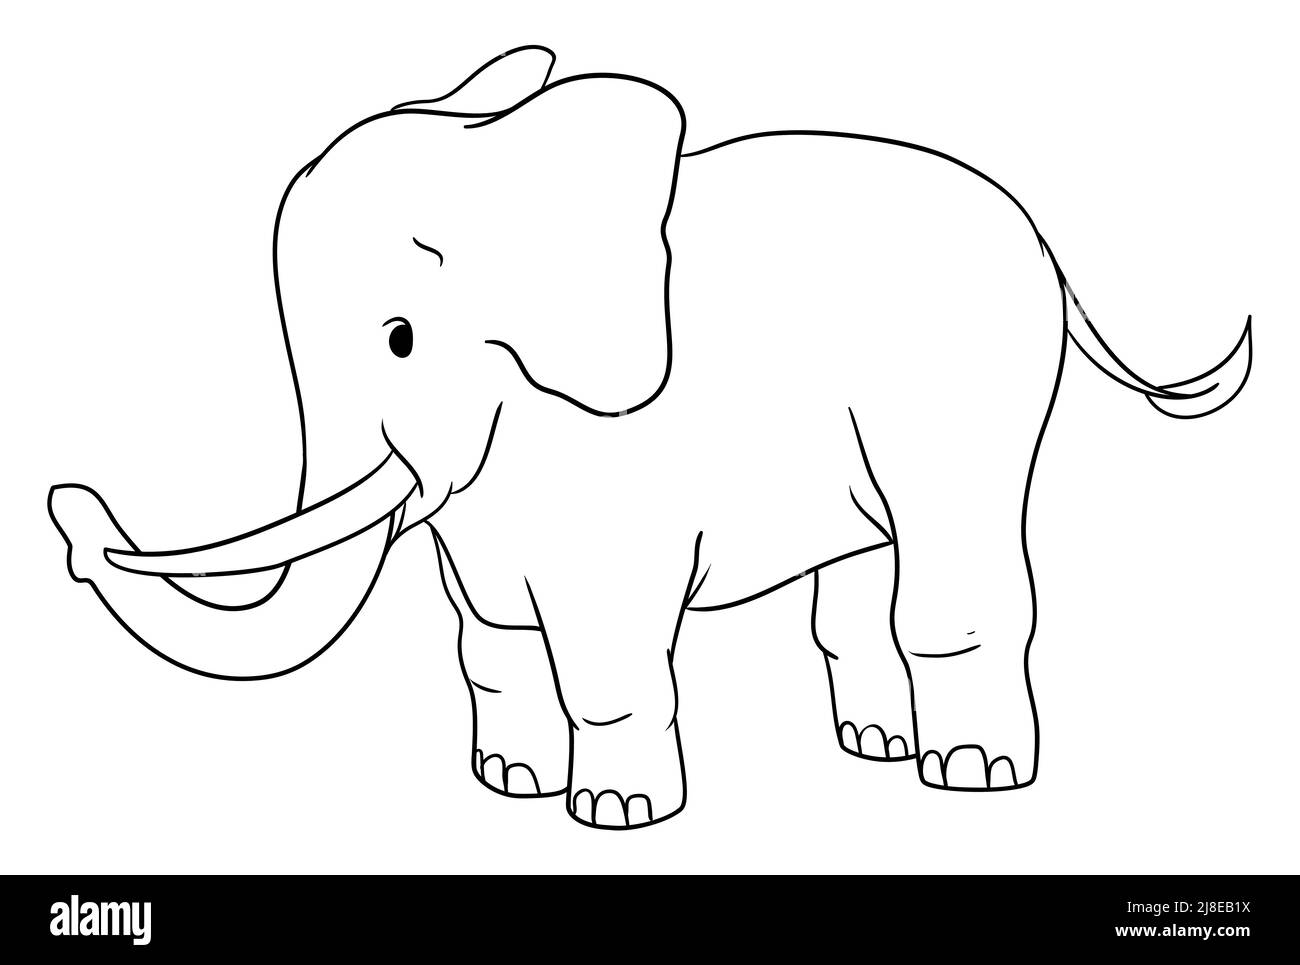 Colorless design of a cute elephant standing with its trunk, tusks, tail and big ears, to color it. Stock Vector